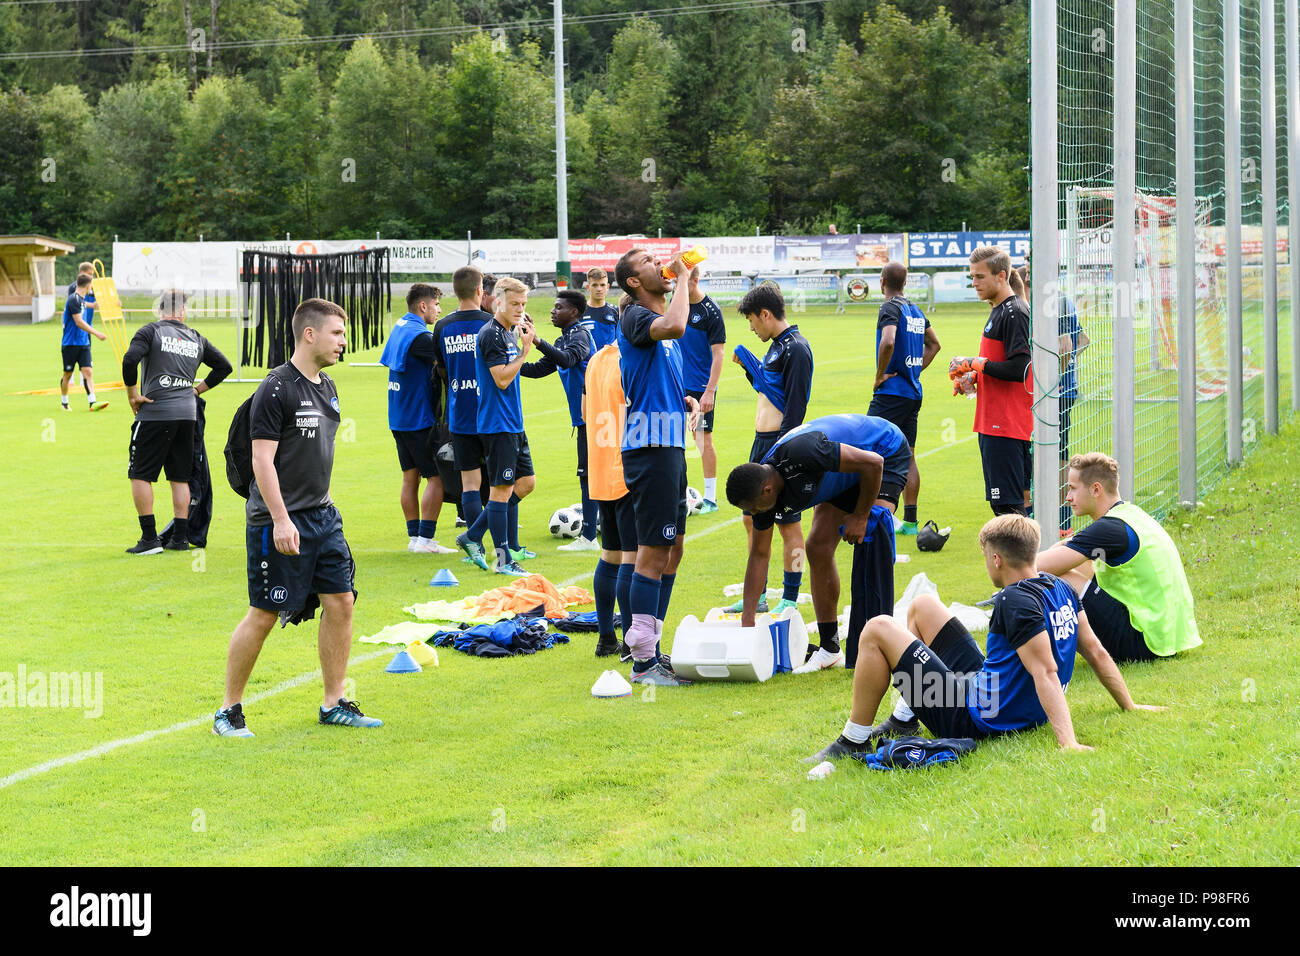 Exhaustion at the players after end of training. Daniel Gordon (KSC) drinks. GES/Soccer/3rd league: Karlsruher SC - Training camp Waidring, Tyrol, Austria Season 2018/19, 16.07.2018 - | usage worldwide Stock Photo